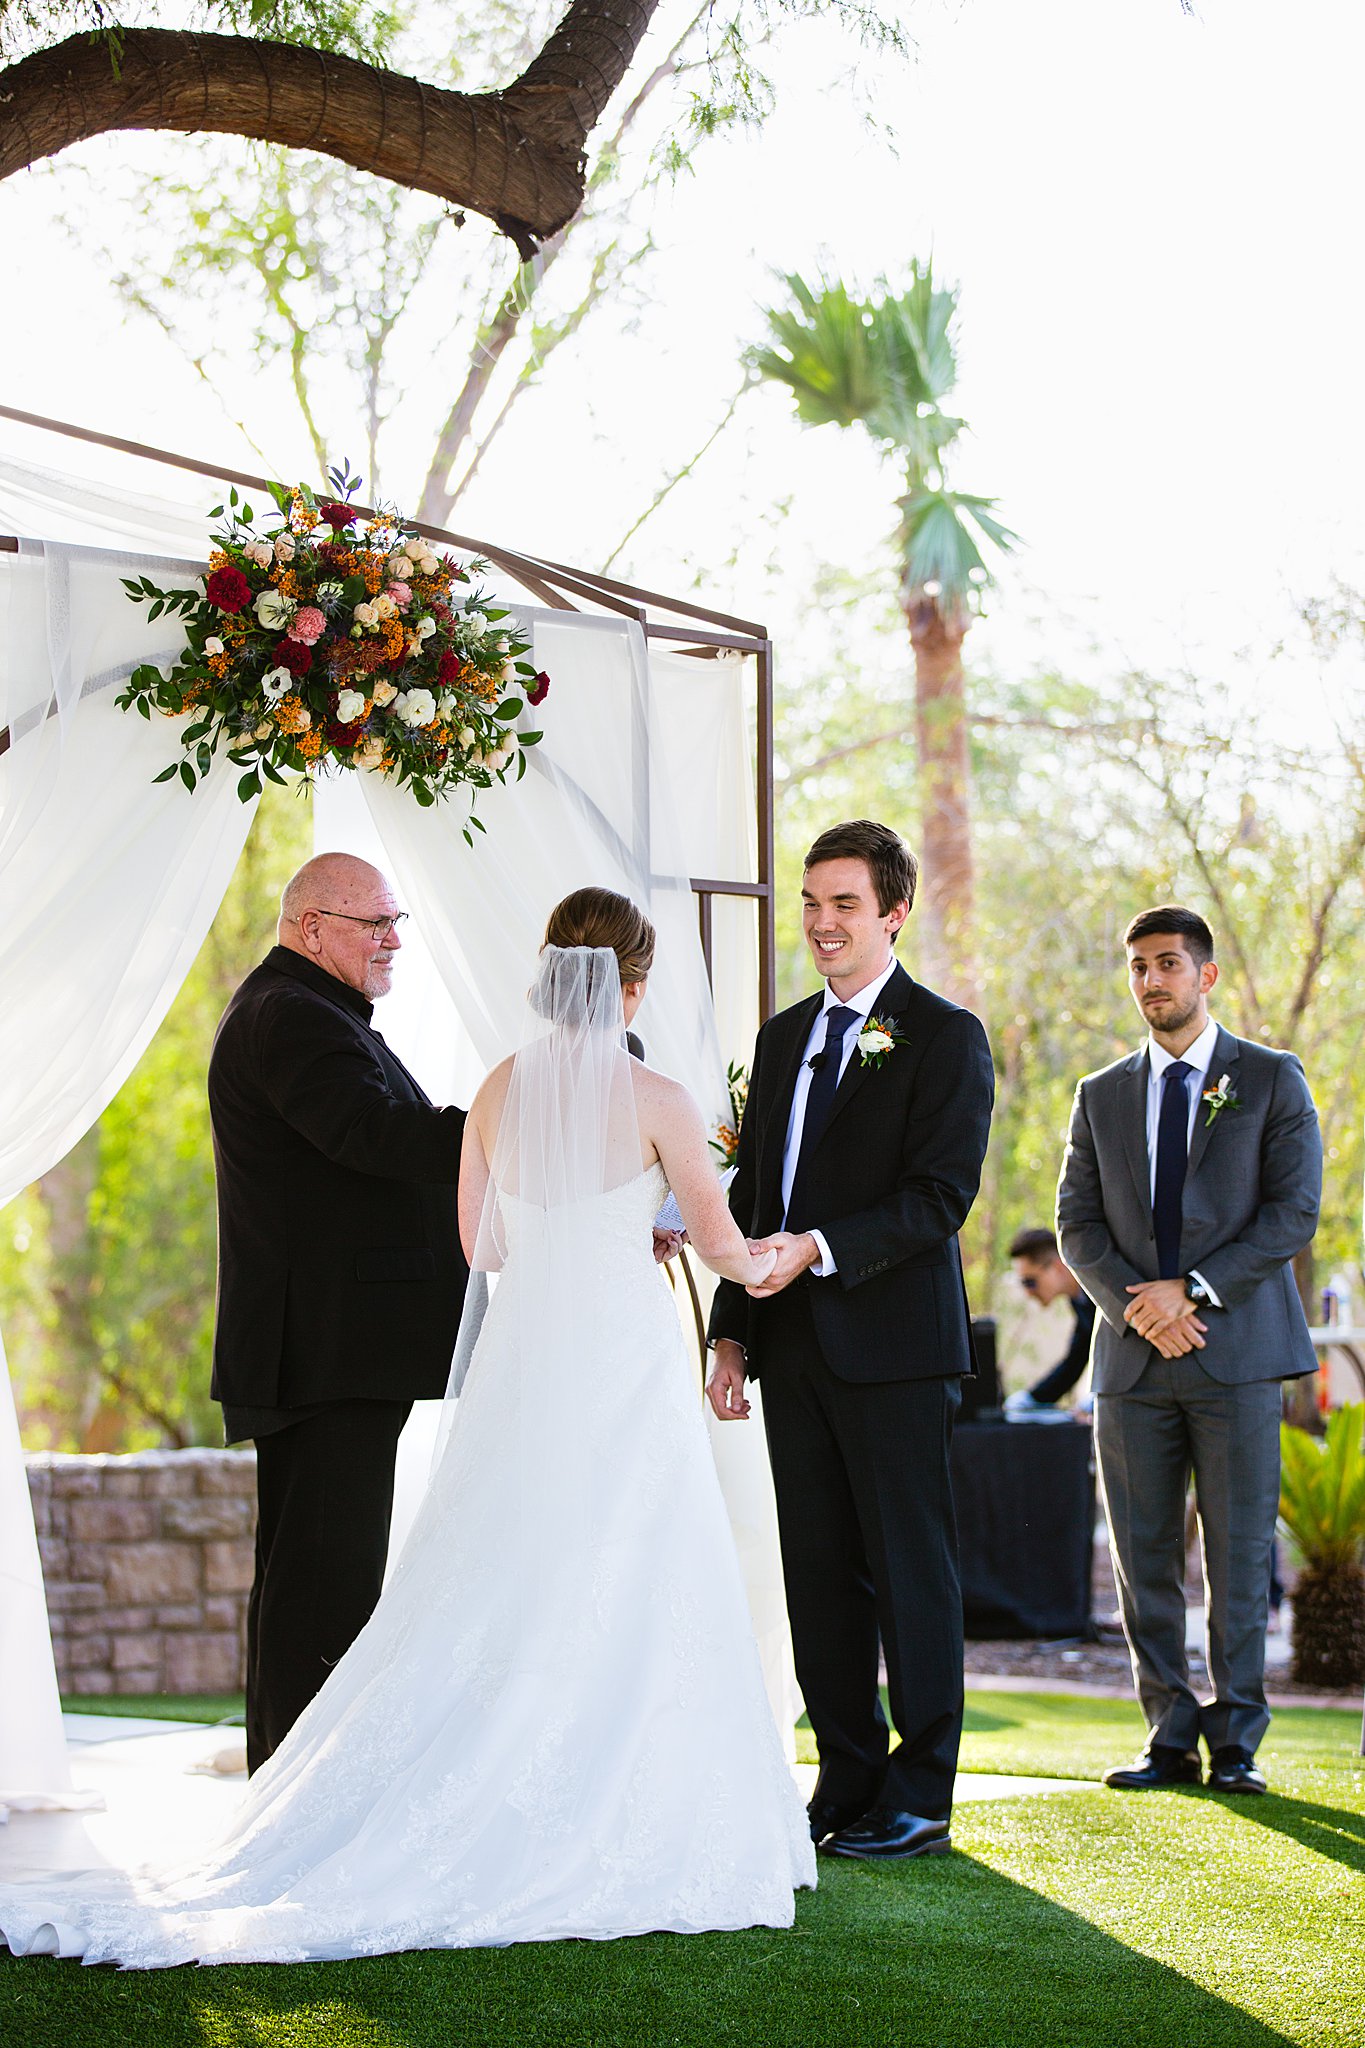 Groom looking at his bride during their wedding ceremony at Secret Garden Events by Phoenix wedding photographer PMA Photography.